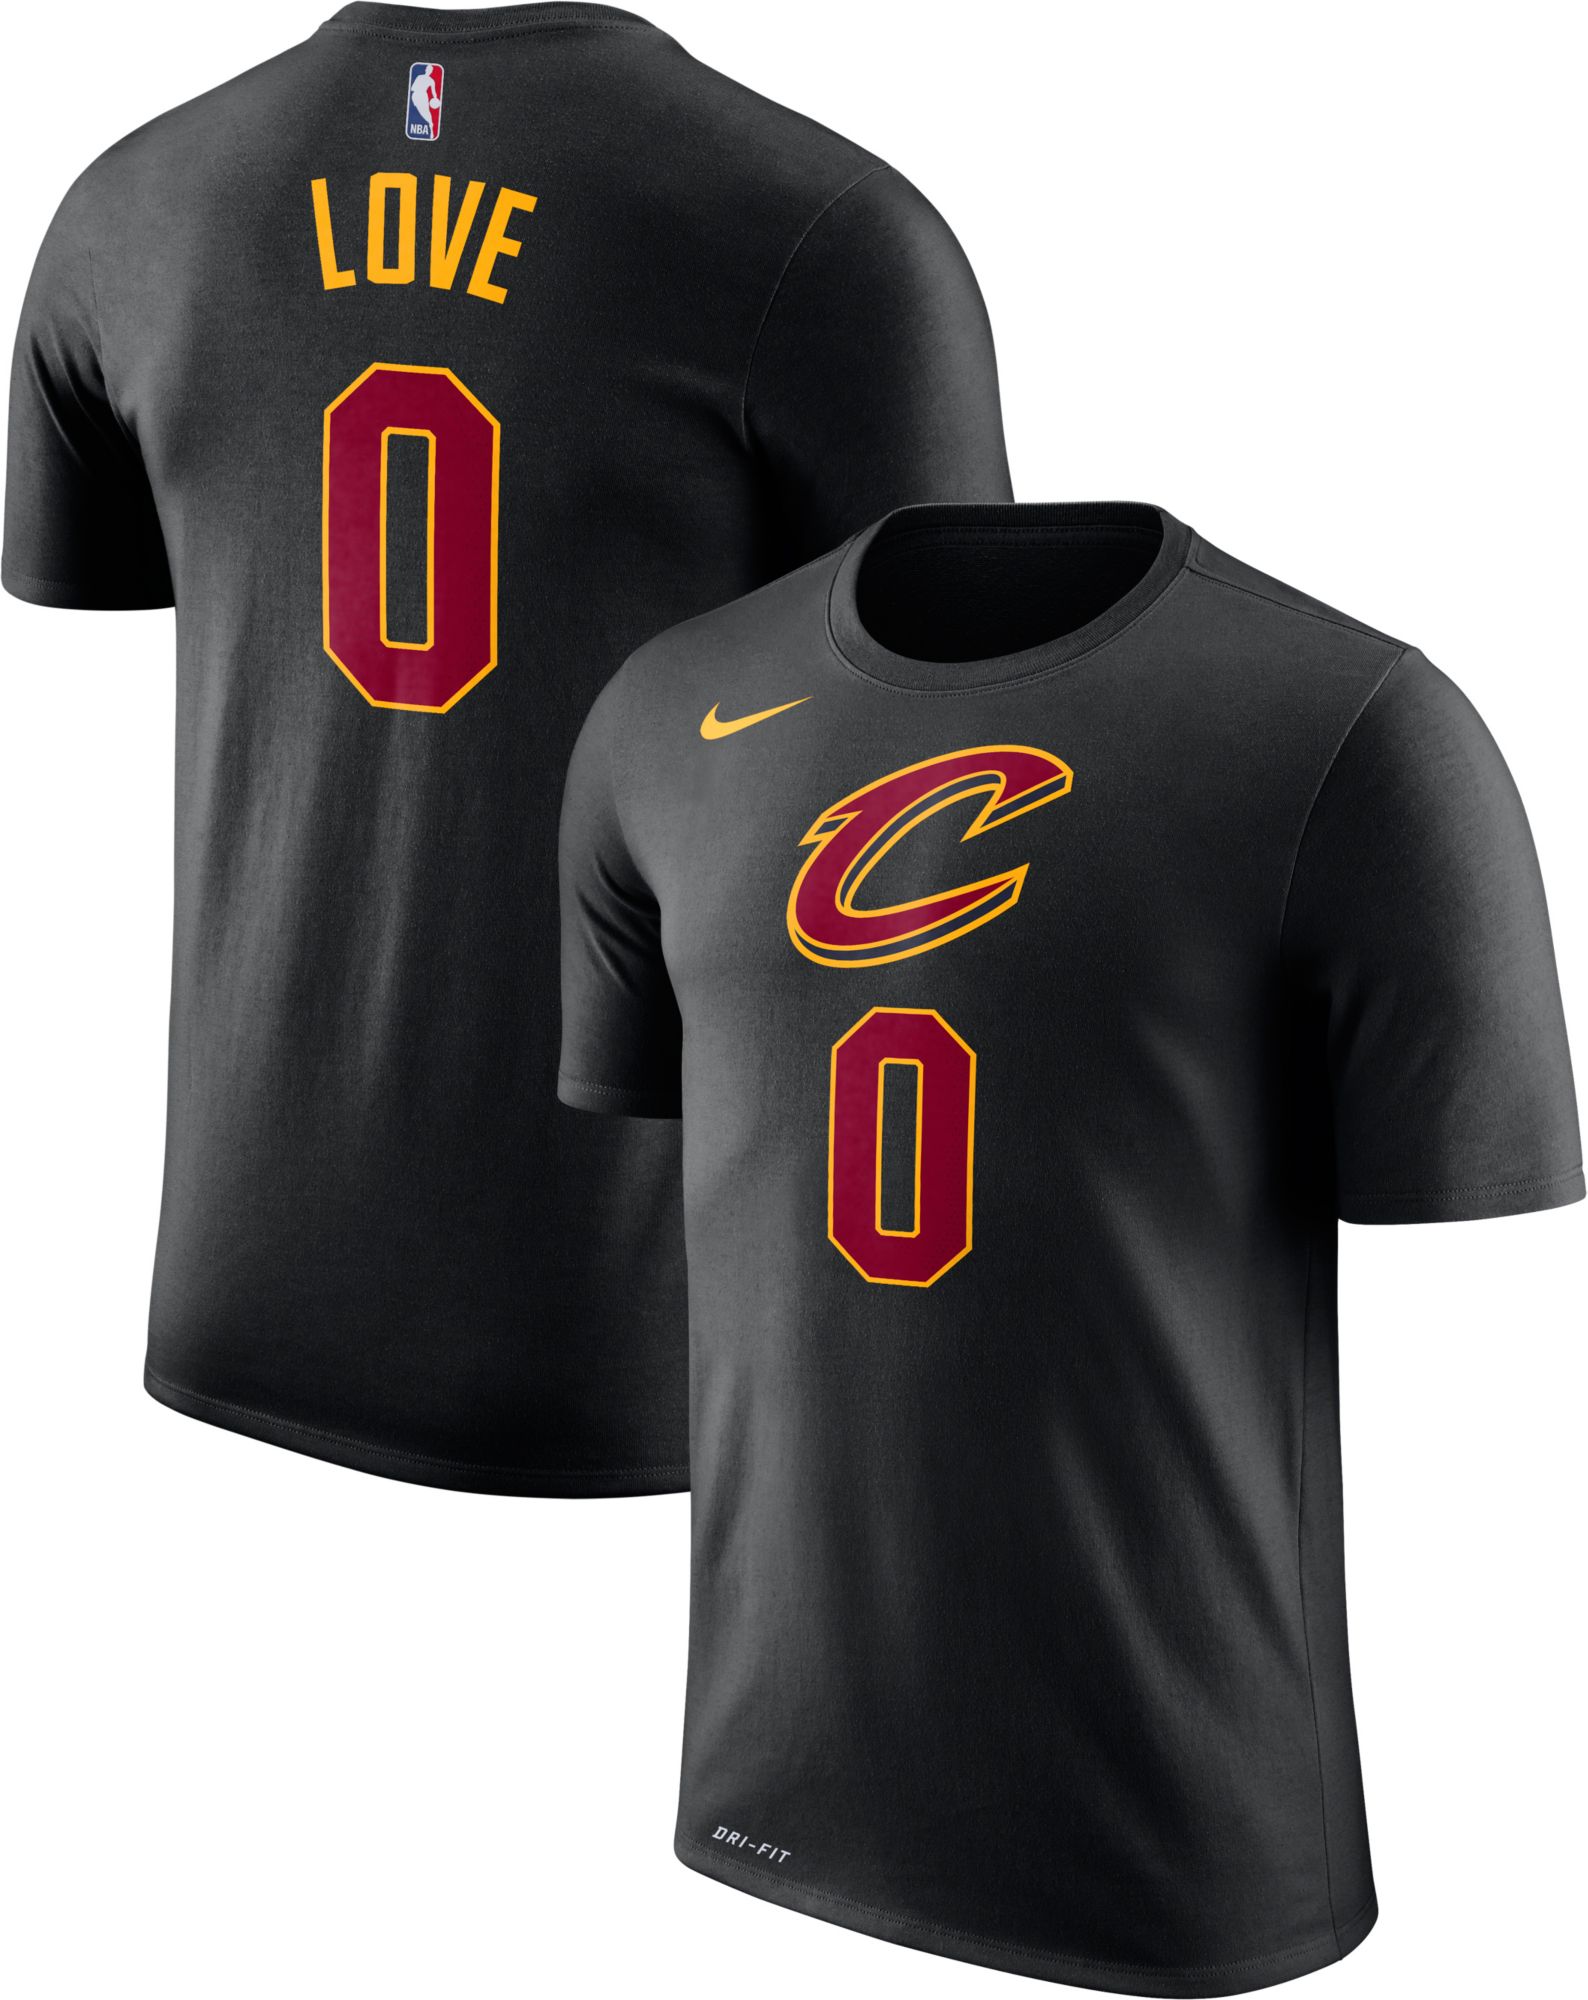 kevin love womens jersey